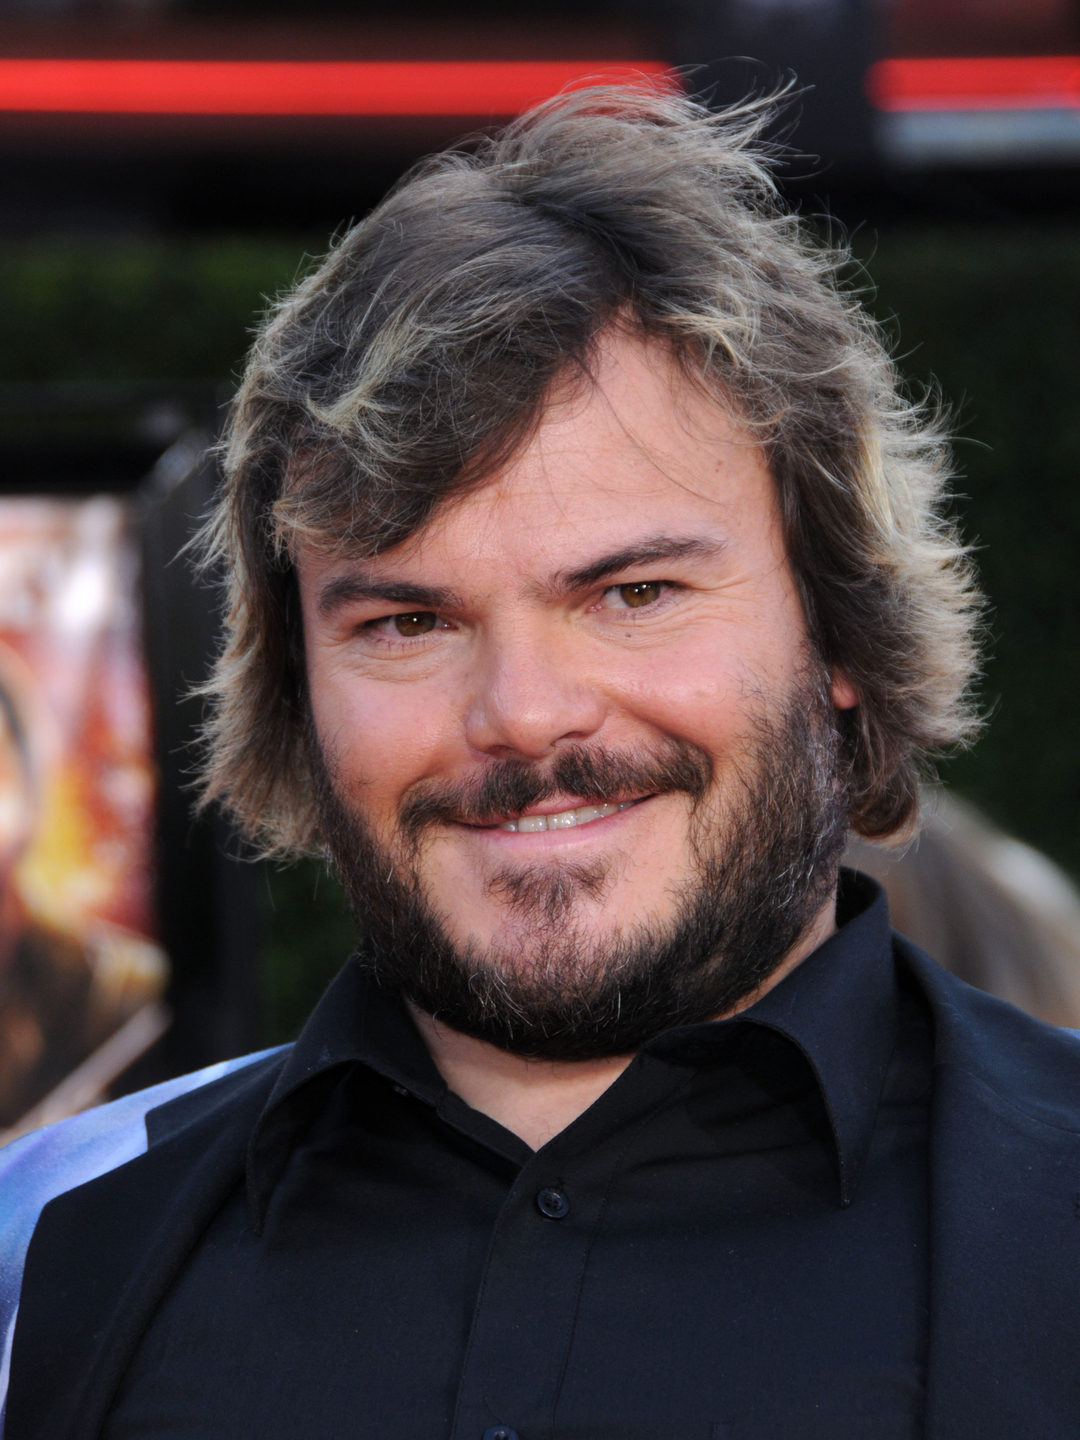 Jack Black who is his mother